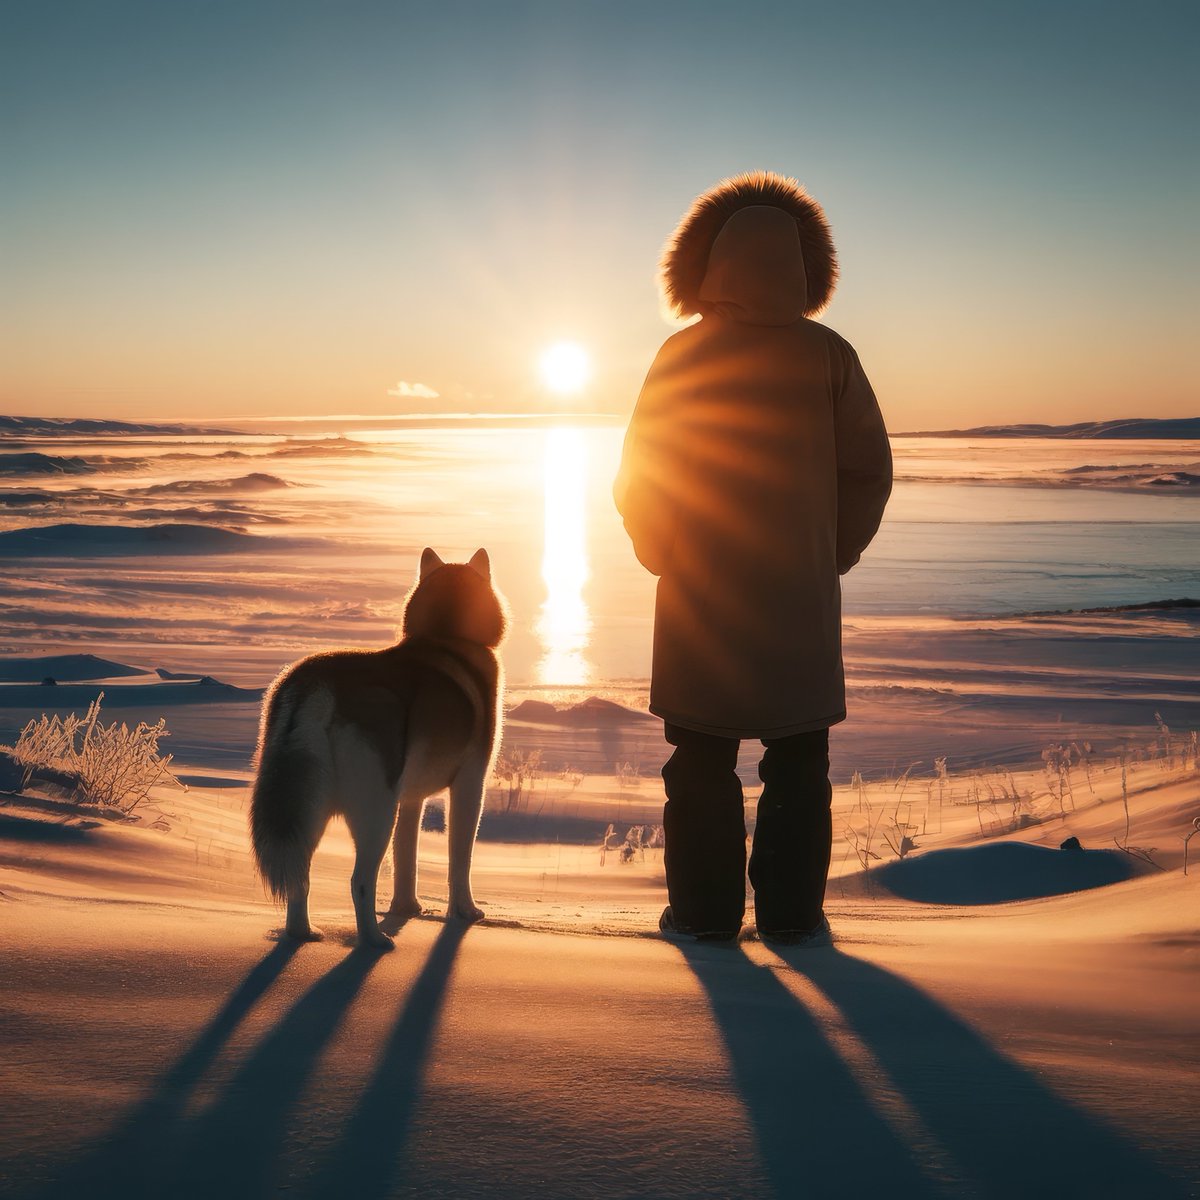 Good morning! ☕☀️❄️ Each new dawn brings the Arctic’s challenge, and with Sisu by my side, we face it head-on. Resilience is born in the resolve to begin anew each day. As the icy winds challenge us, we find strength in standing together, witnessing the sunrise over ice.☀️🧊